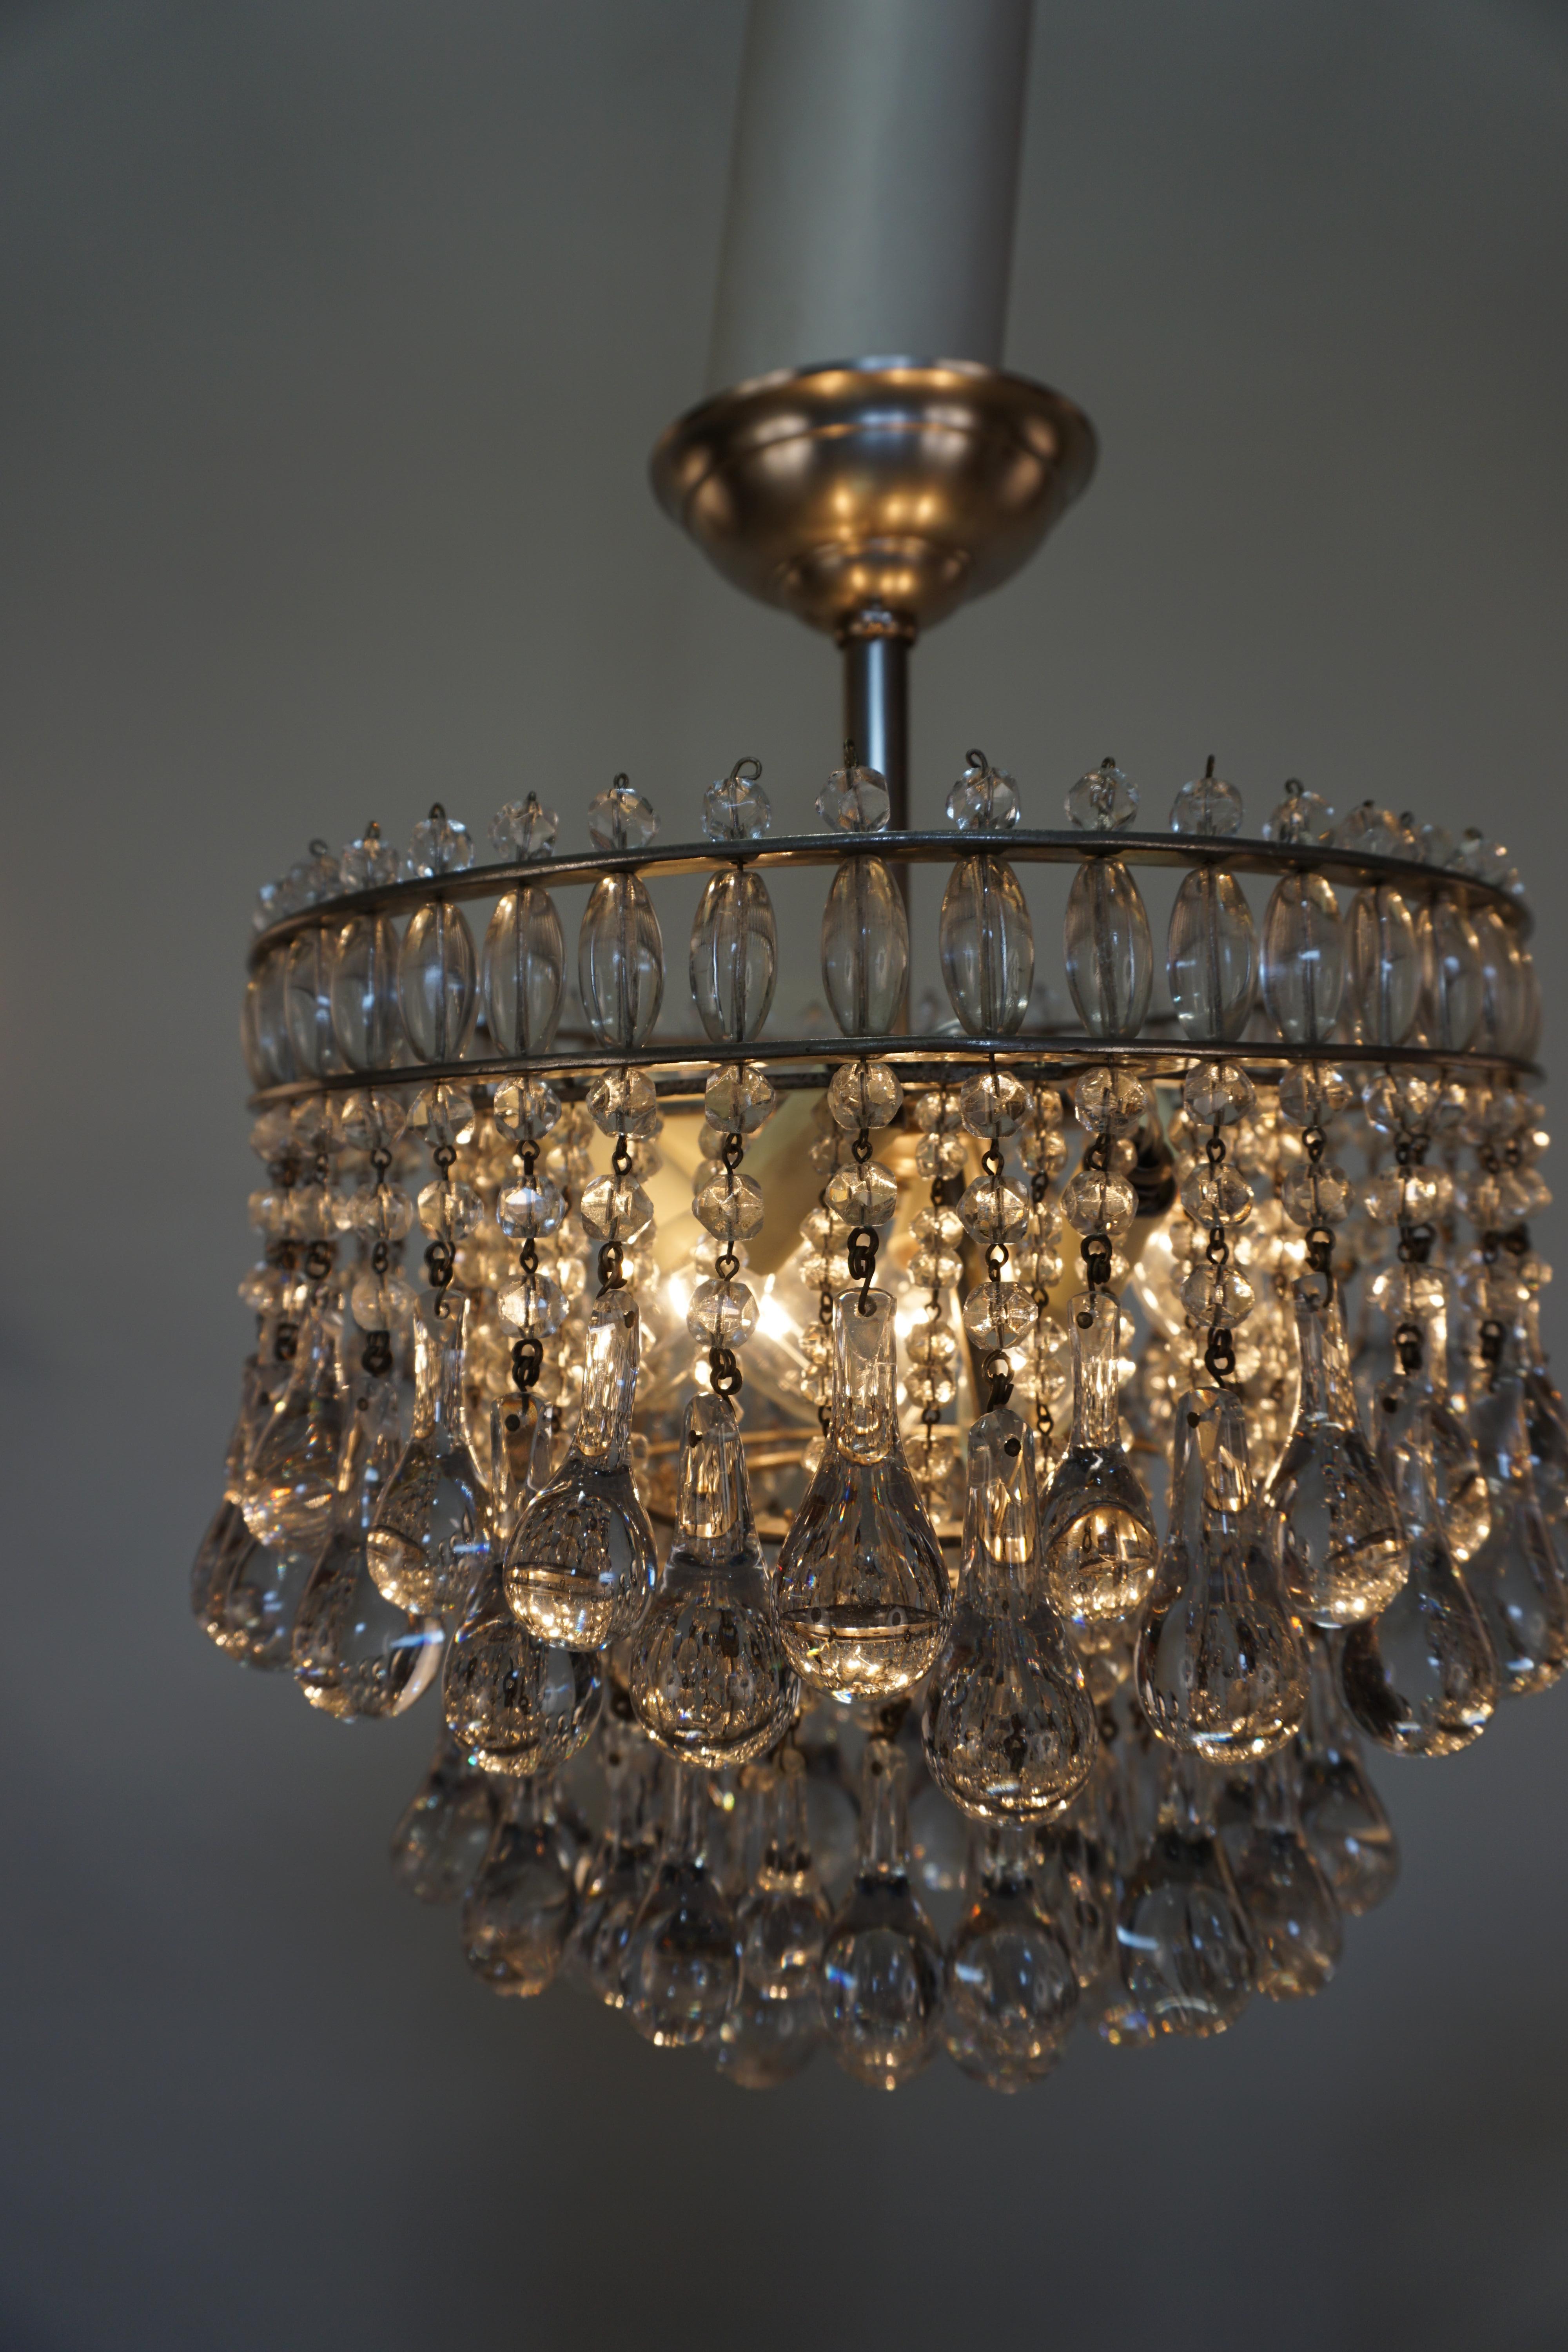 An exquisite six-light tear drop crystal and Classic style bronze frame chandelier.